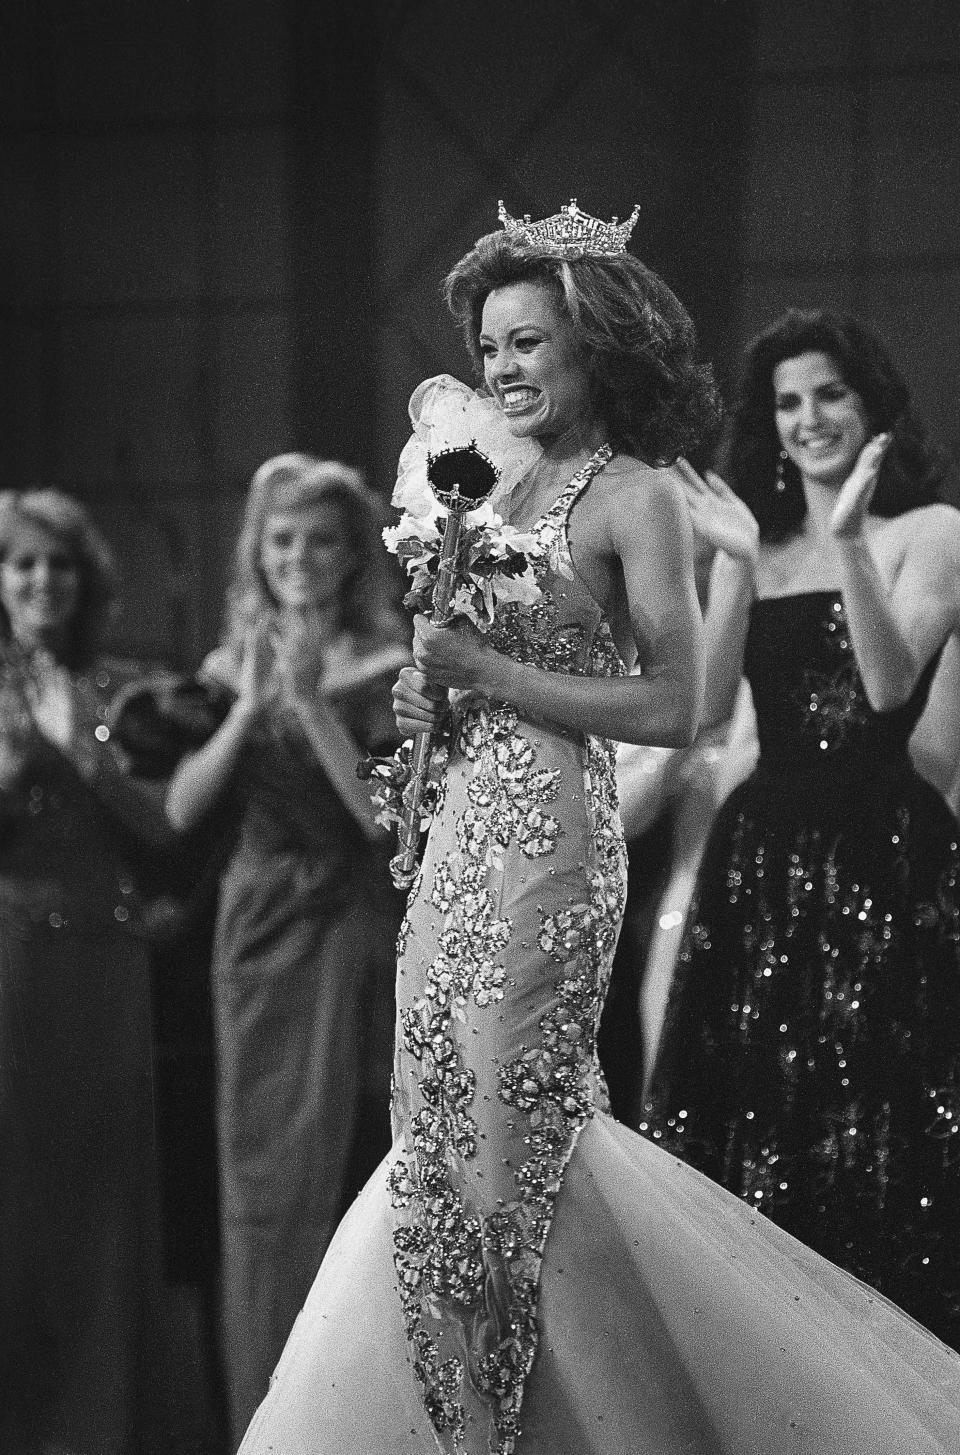 Crowned the new Miss America 1984, Miss New York, Vanessa L. Williams beams as she is applauded by runners-up Miss Virginia, Lisa Aliff (left), and Miss Ohio, Pamela Rigas (right). Williams is the first black woman to have won the crown in the pageant's 63-year history.